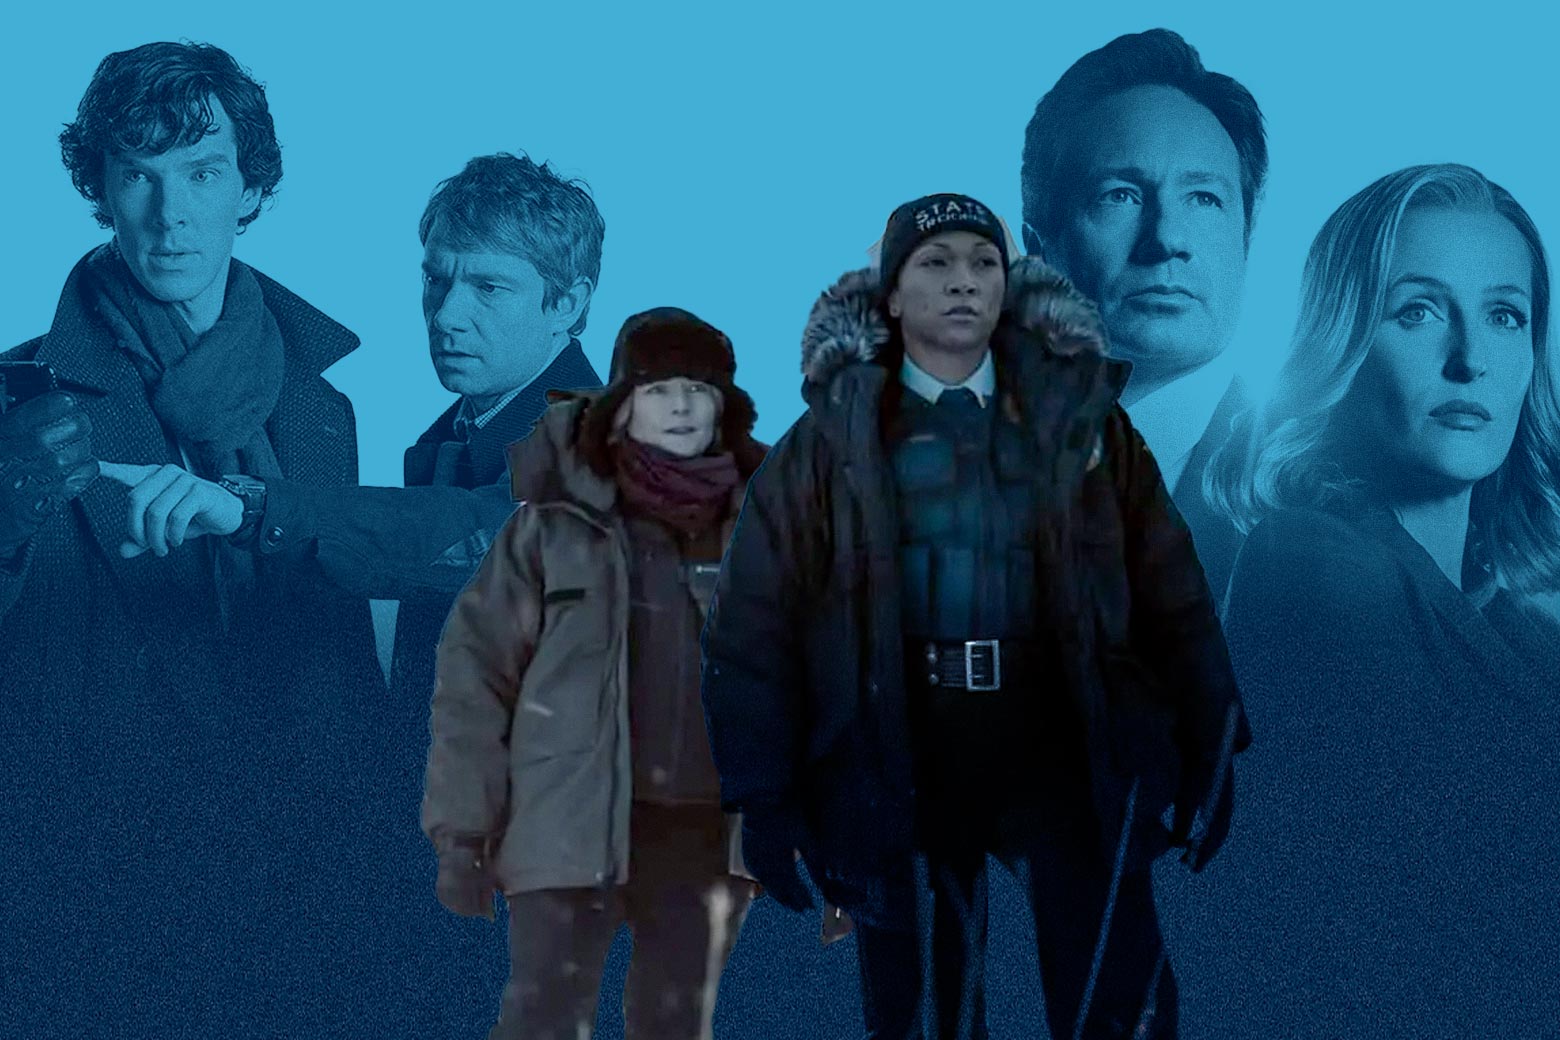 Detectives Danvers and Navarro stand together, in front of a blue collage of other detective duos, including Holmes and Watson and Scully and Mulder.